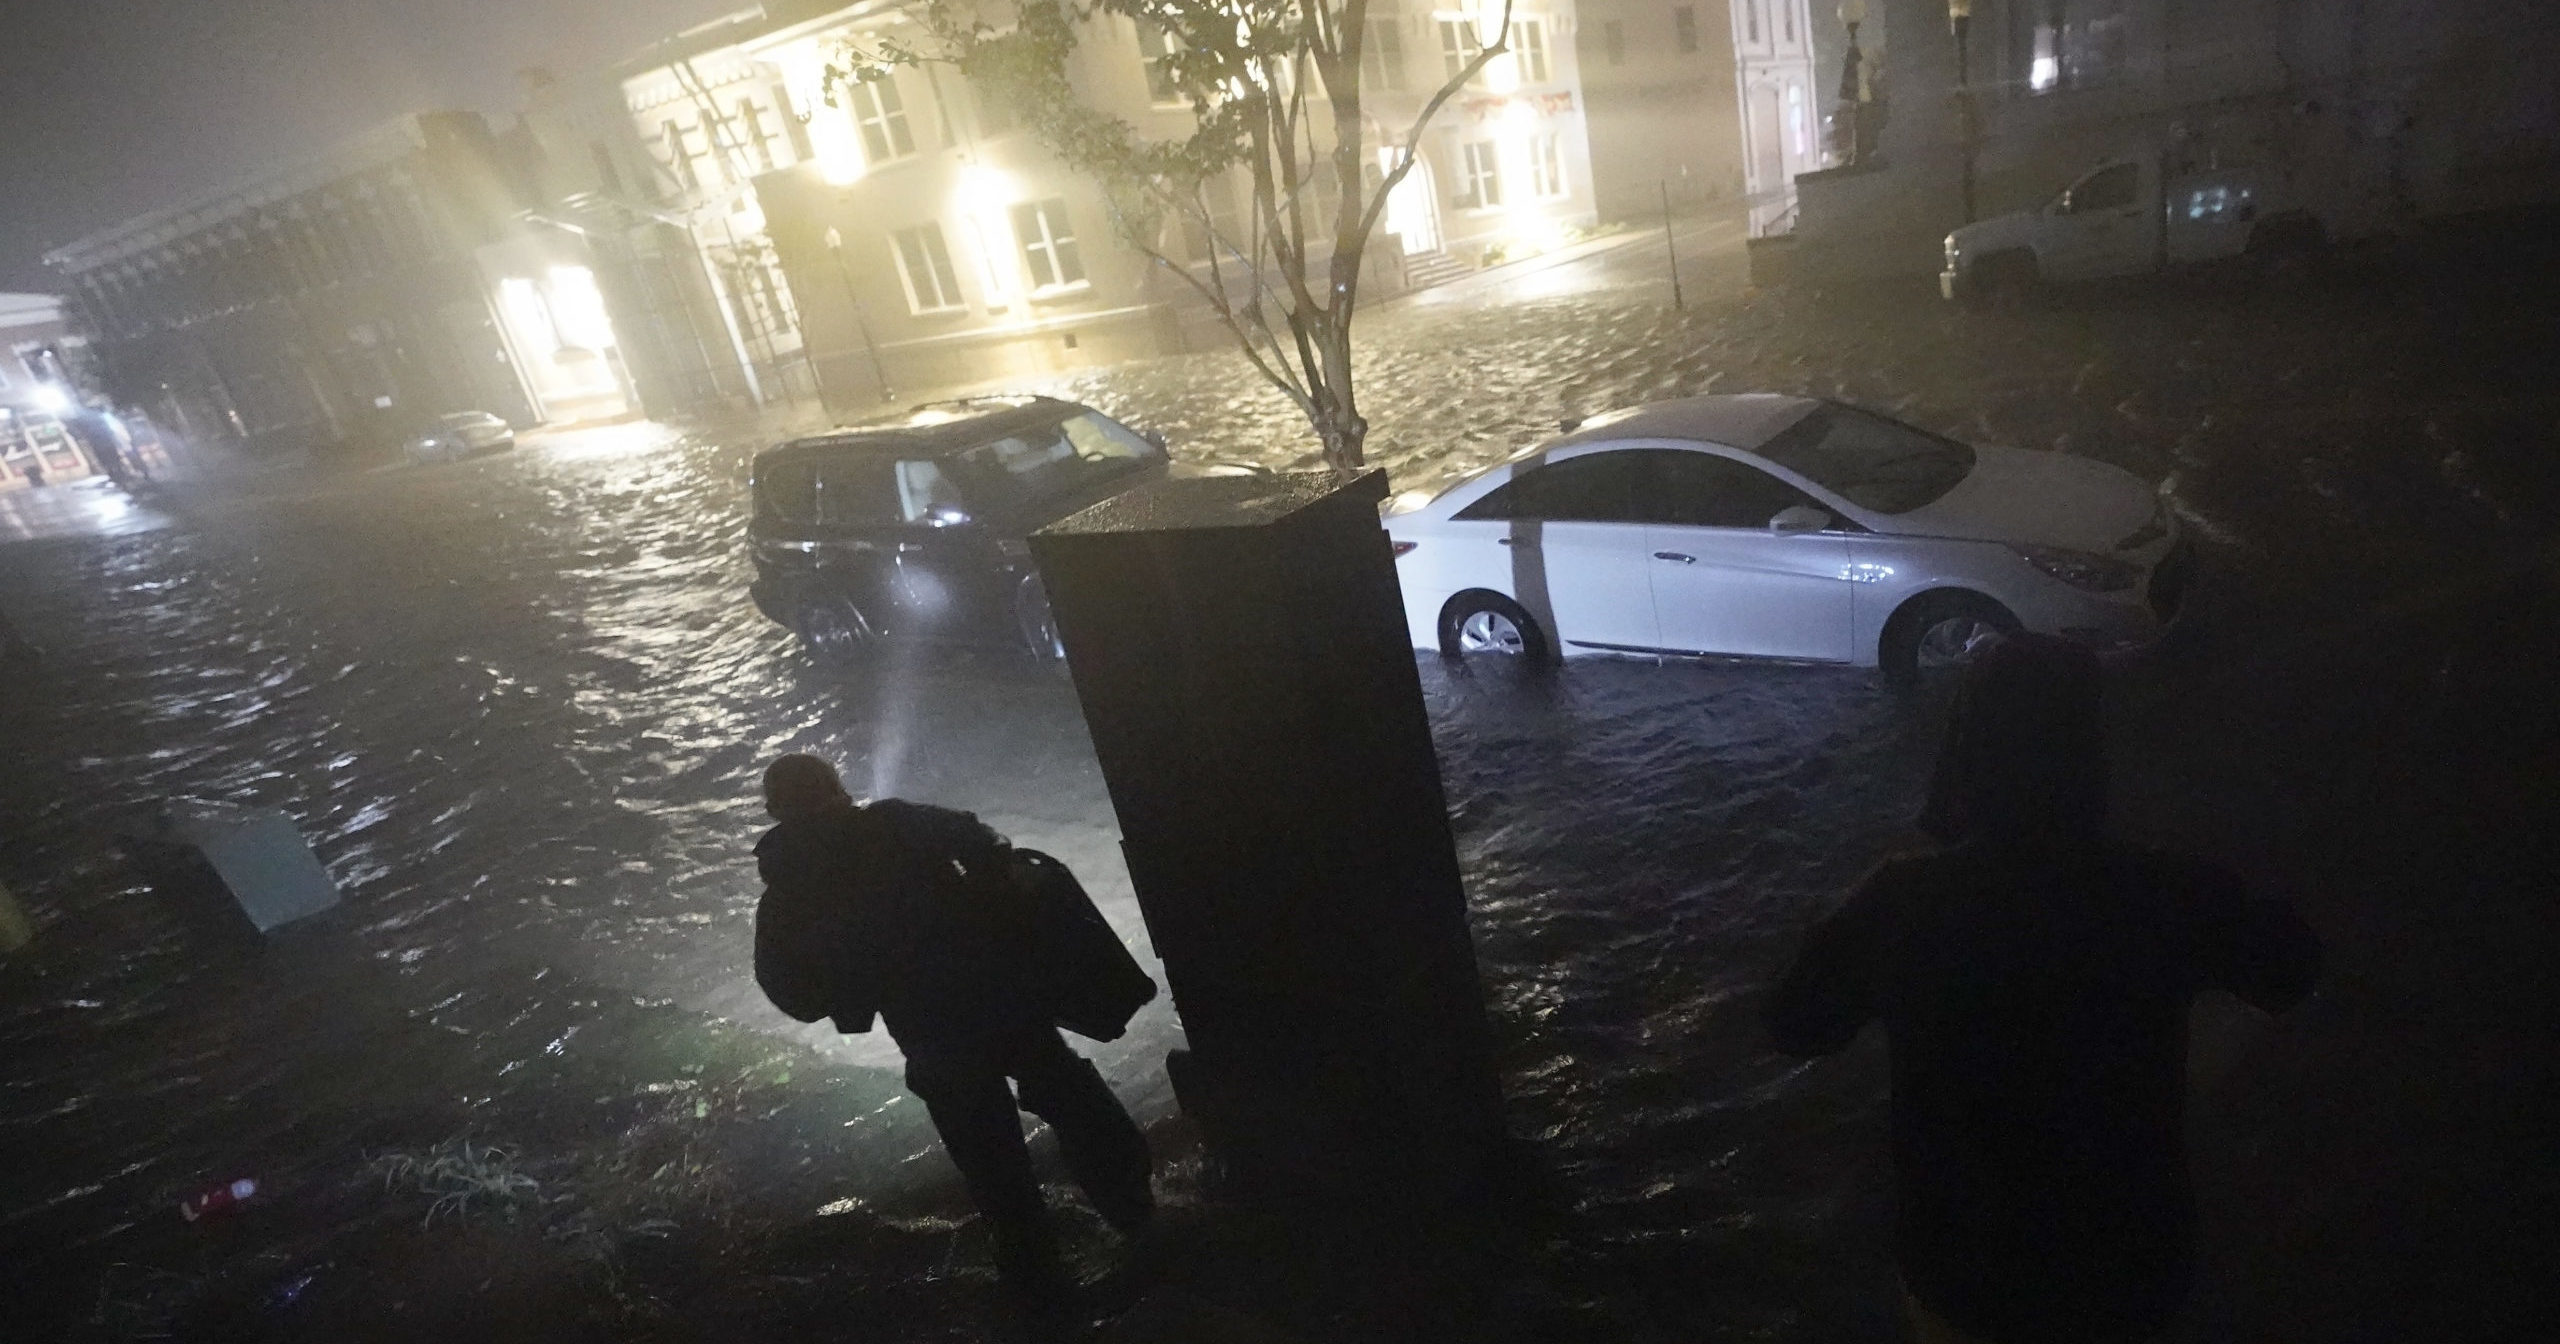 People use flashlights as they walk on flooded streets on Sept. 16, 2020, in Pensacola, Florida. Hurricane Sally made landfall near Gulf Shores, Alabama, as a Category 2 storm, dumping torrential rain that forecasters said would cause dangerous flooding from the Florida Panhandle to Mississippi and well inland in the days ahead.